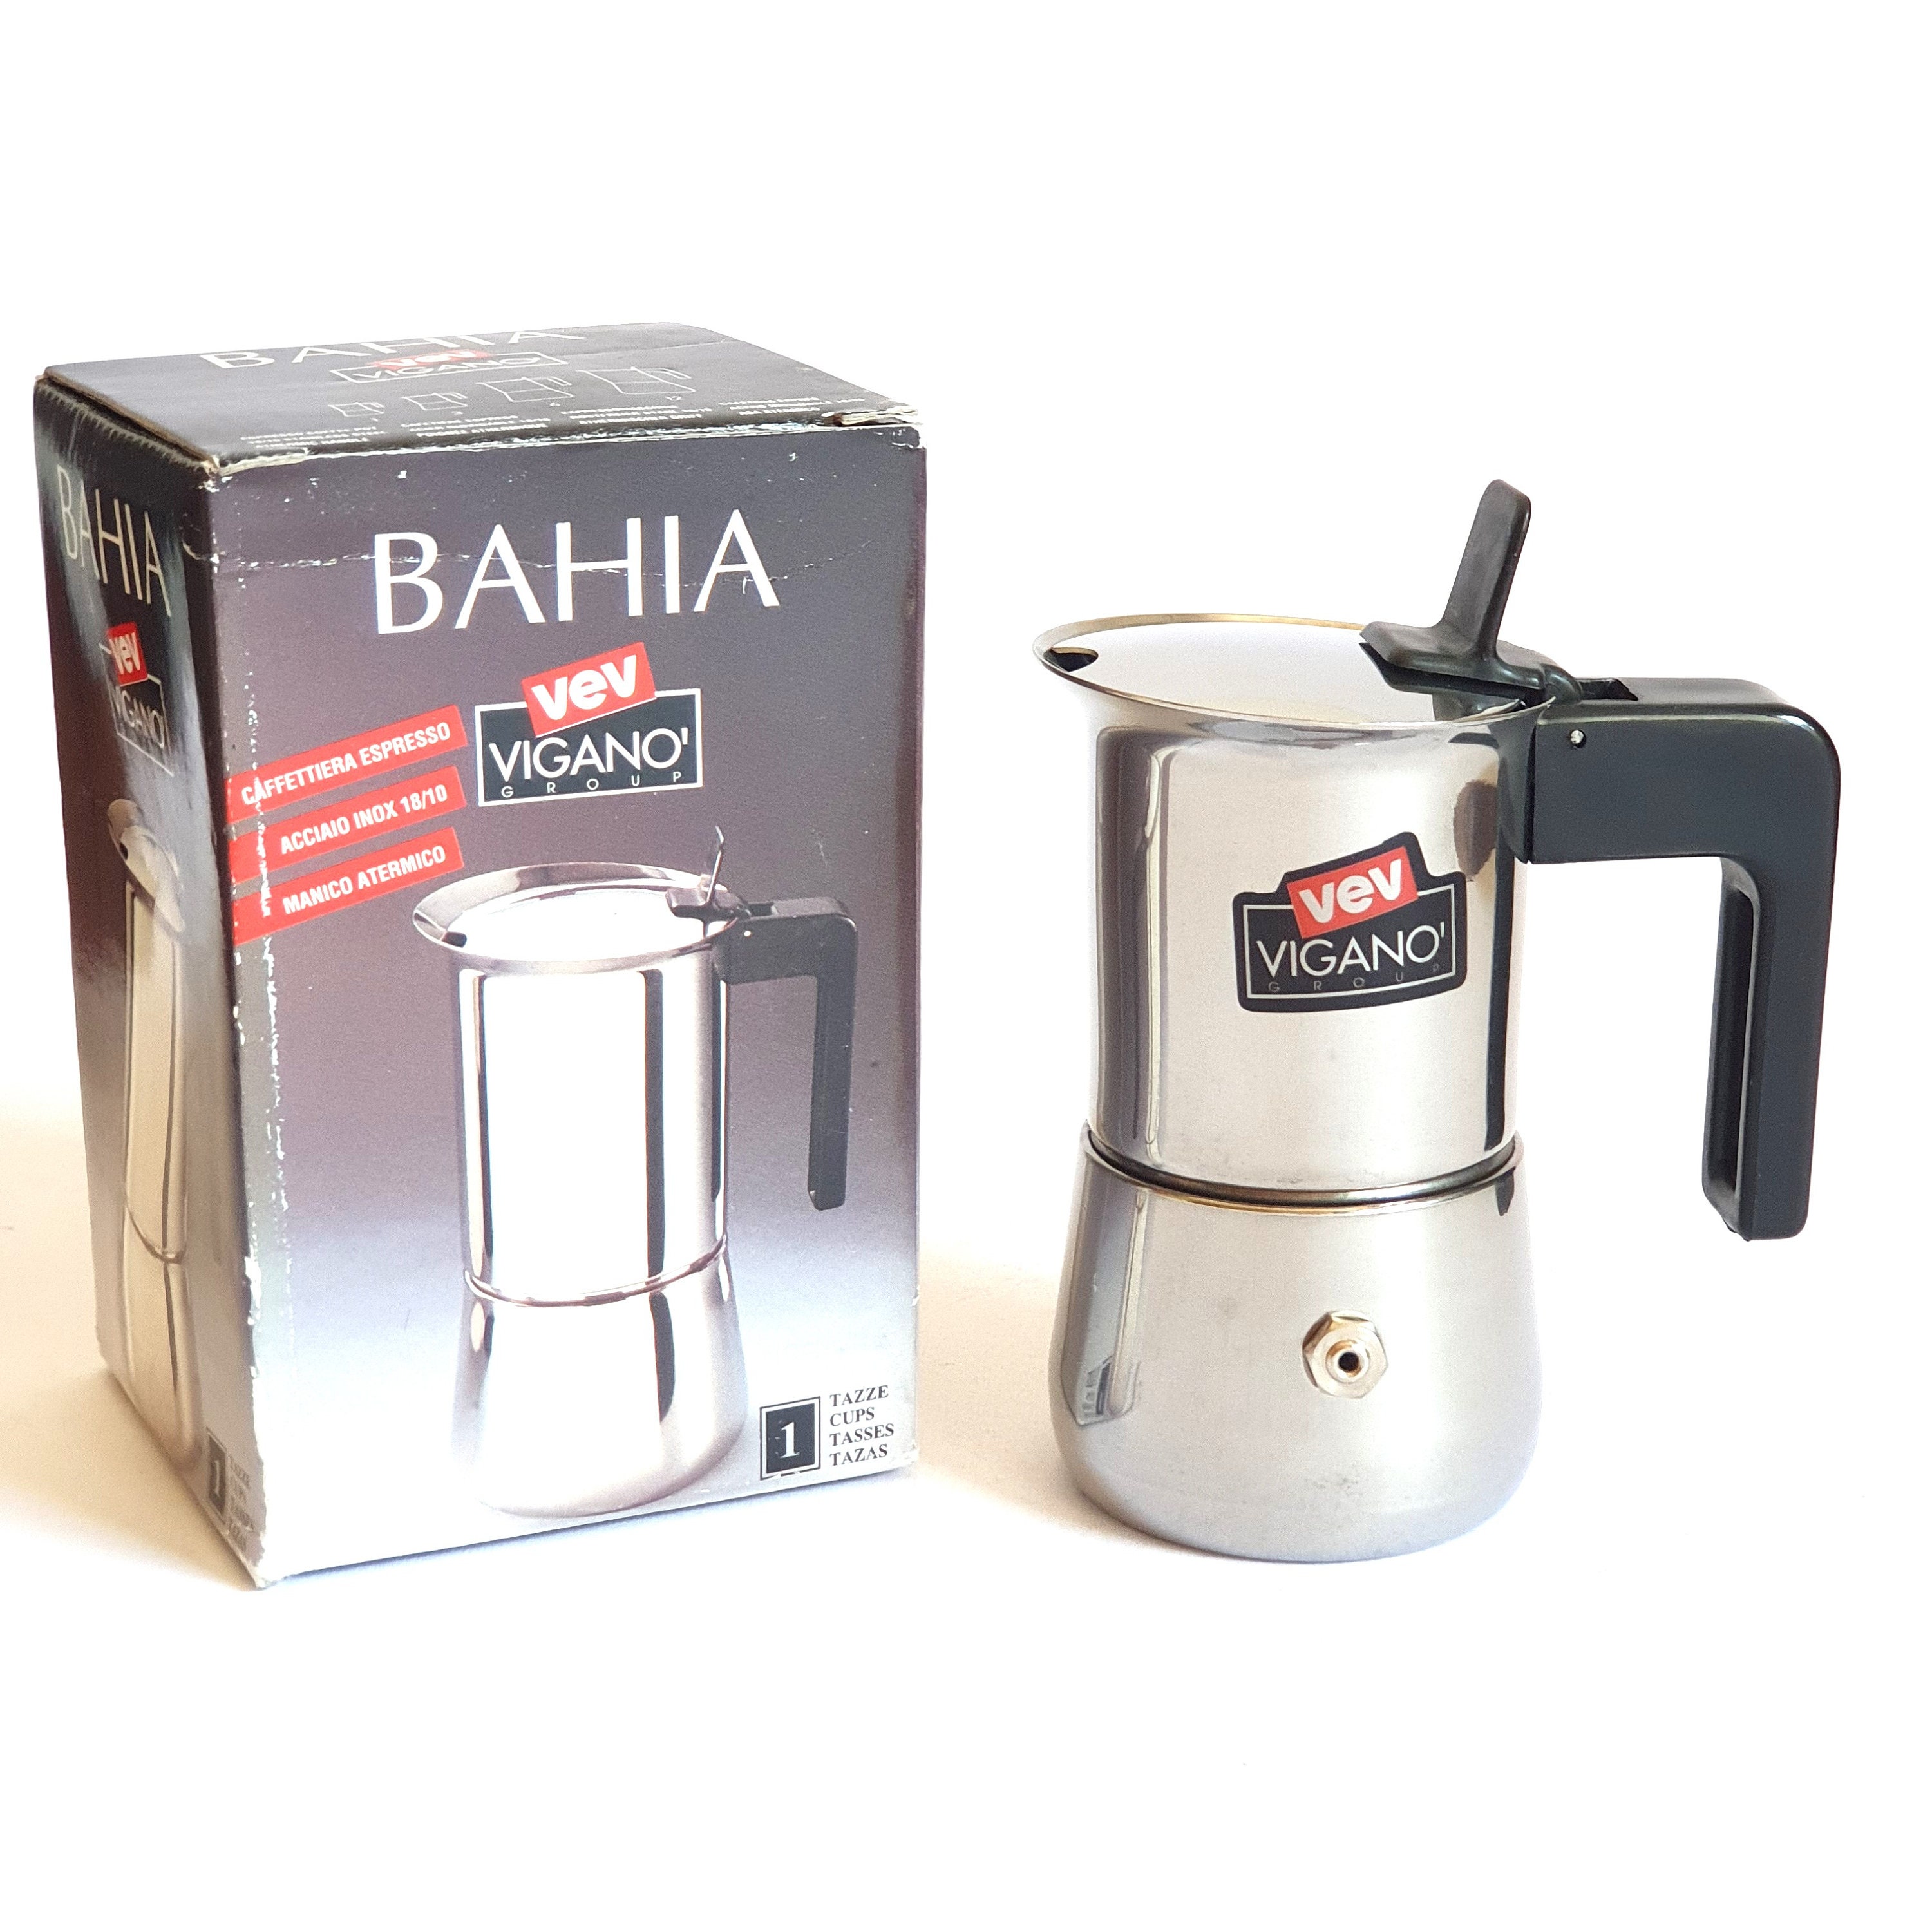 CAFETIERE ITALIENNE PERCOLATEUR 2 TASSES INDUCTION - WEIS